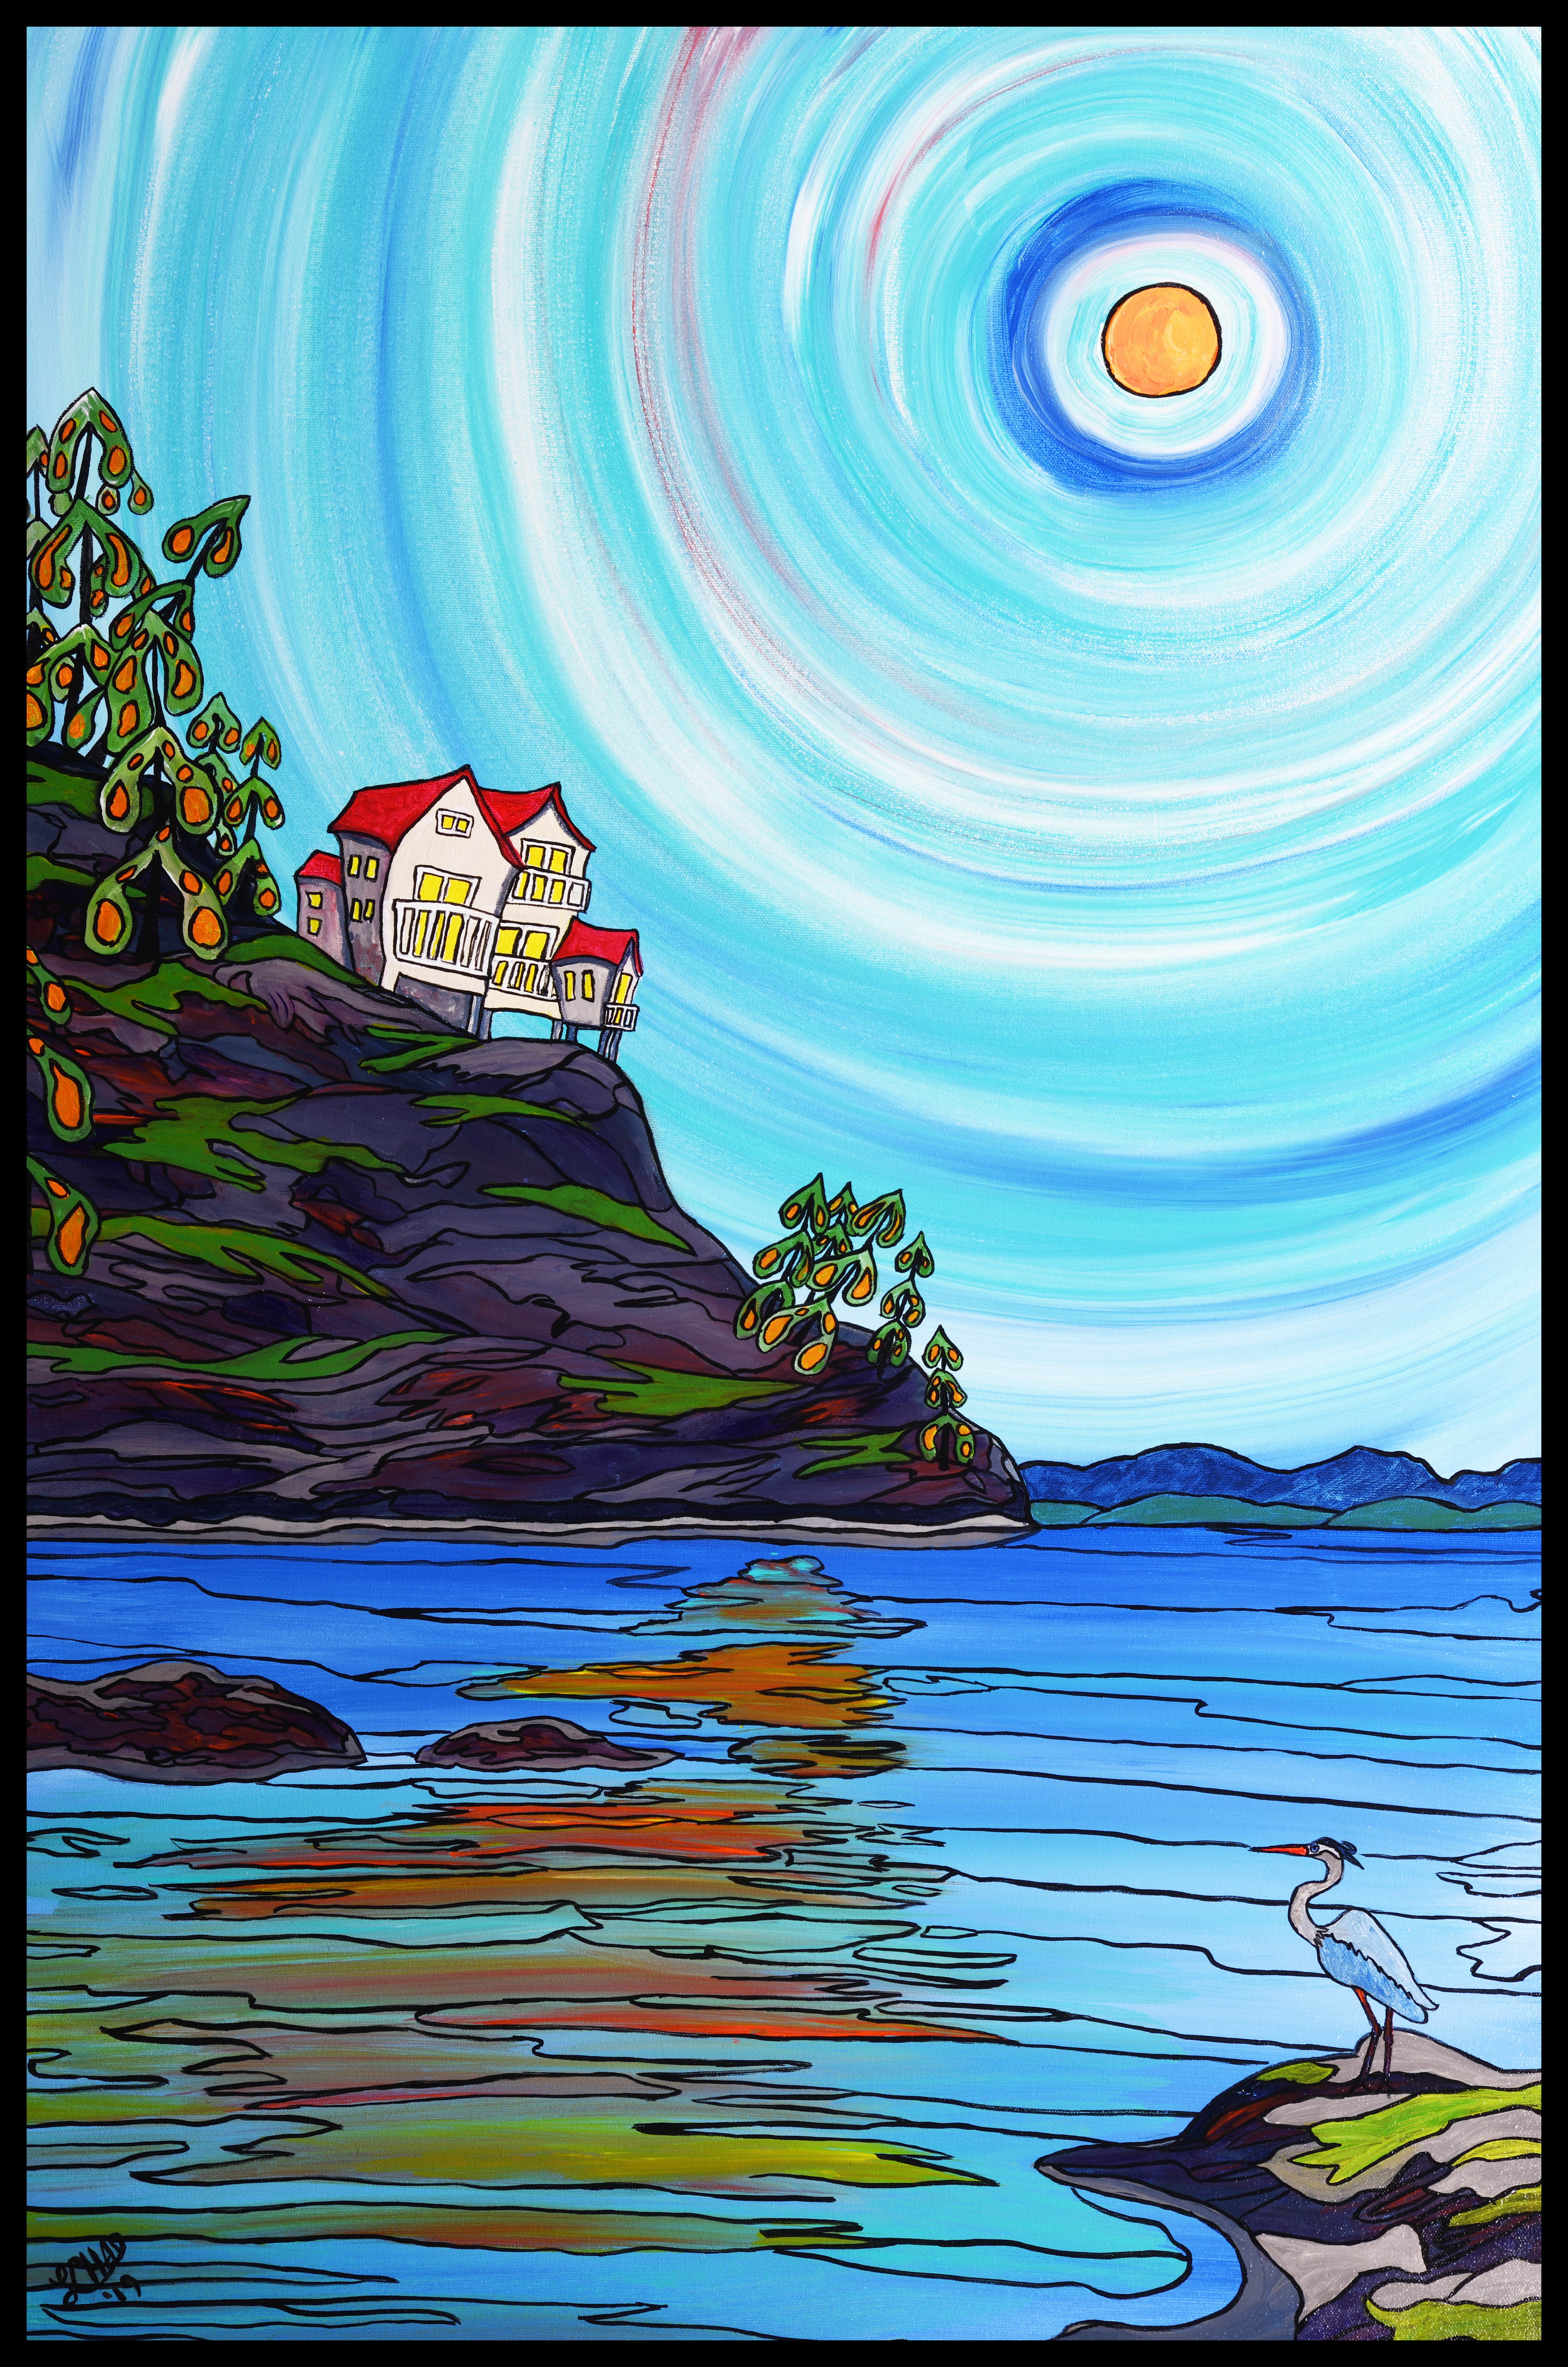 "Living Seaside" [2019}
Image: 24" x 36"
Framed: 27" x 39"
Acrylic on Canvas
SOLD